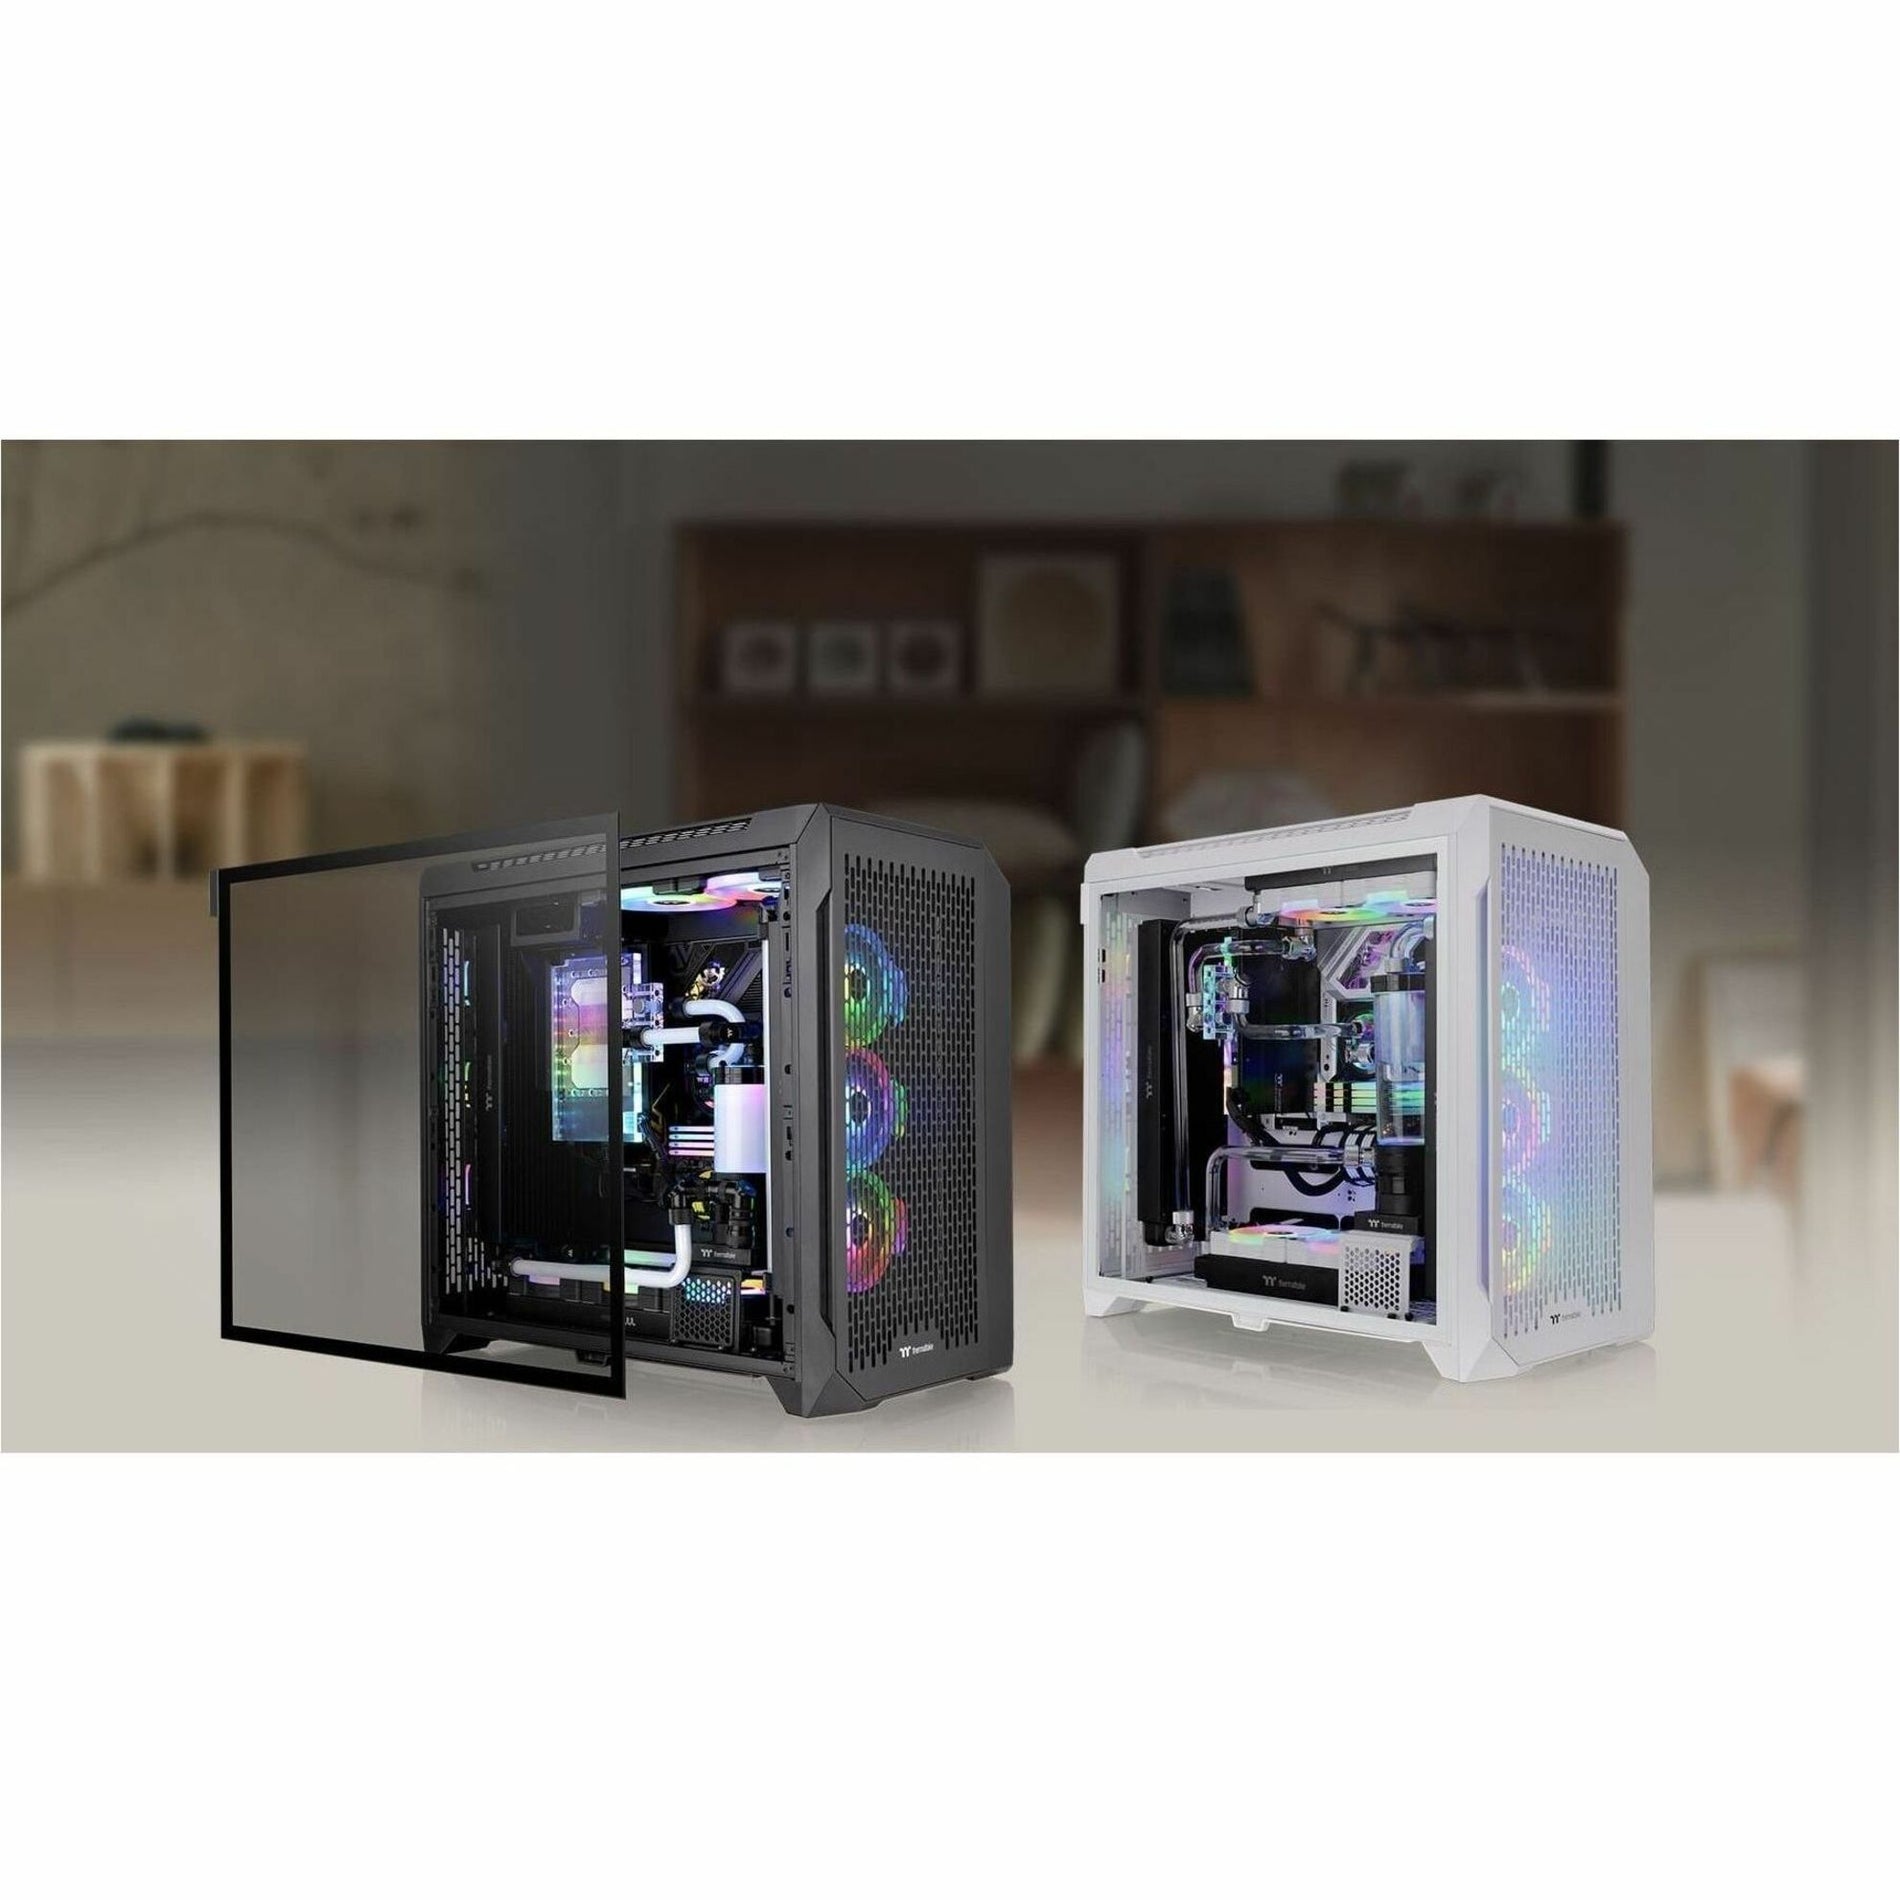 Thermaltake CA-1X6-00F1WN-00 CTE C750 Air Full Tower Chassis, Gaming Computer Case with 1200W Power Supply